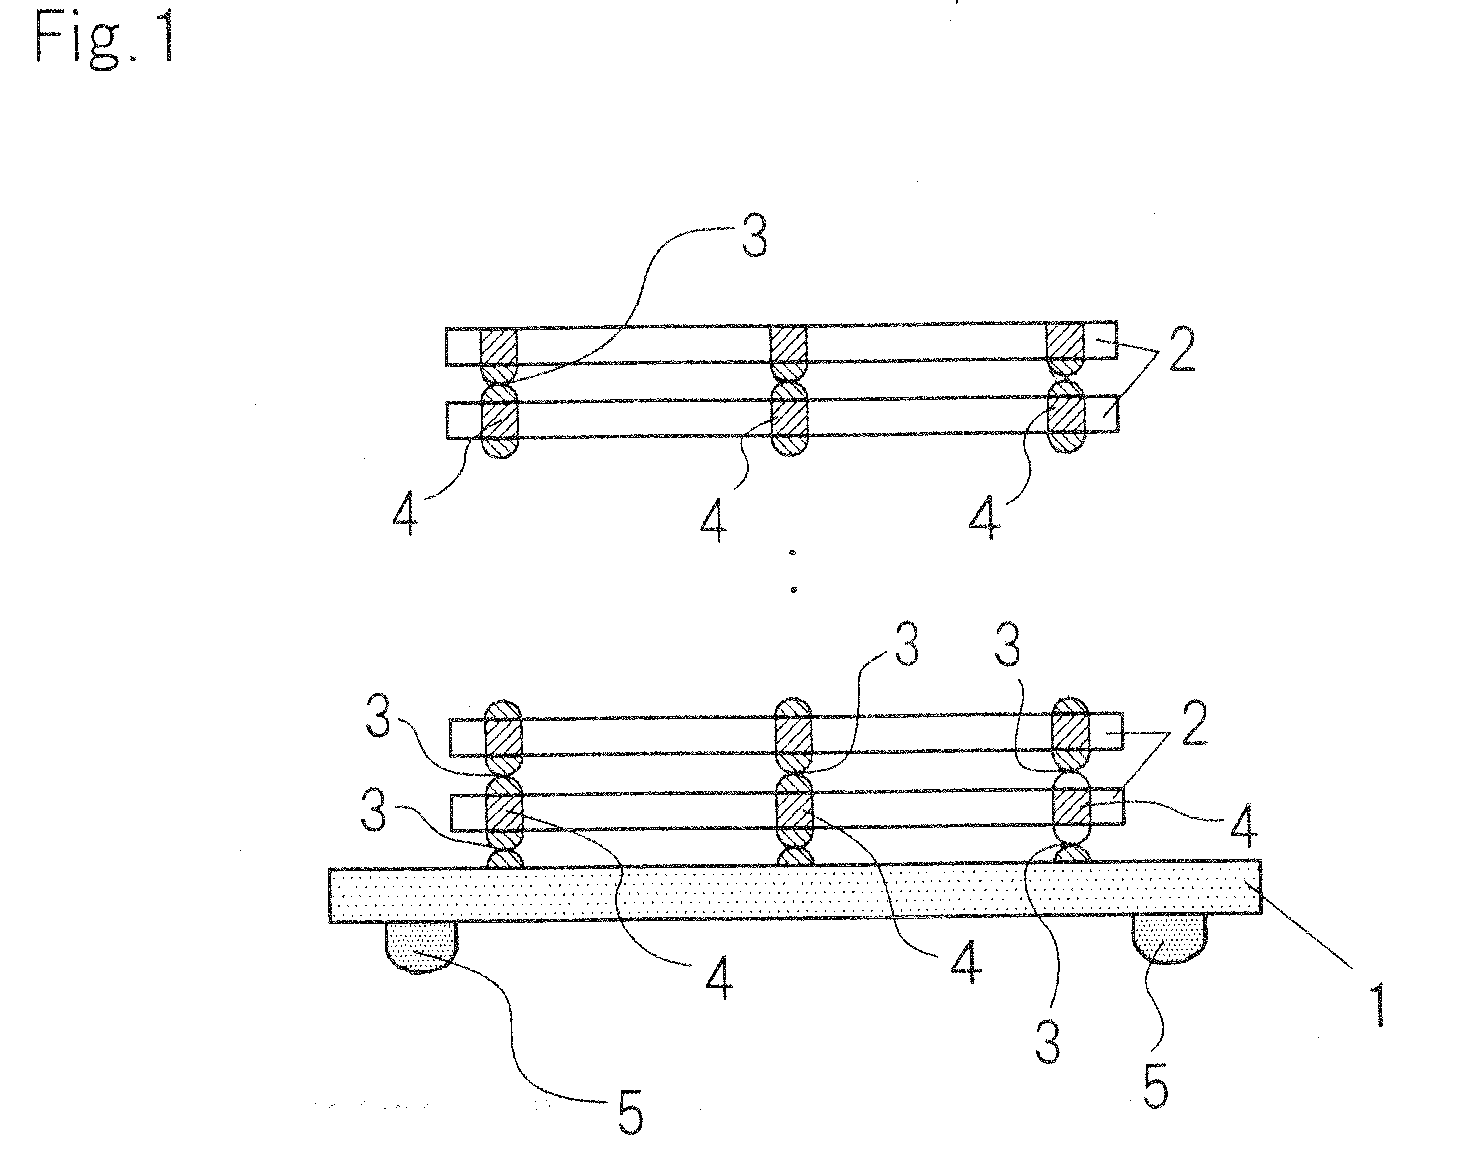 Separate testing of continuity between an internal terminal in each chip and an external terminal in a stacked semiconductor device